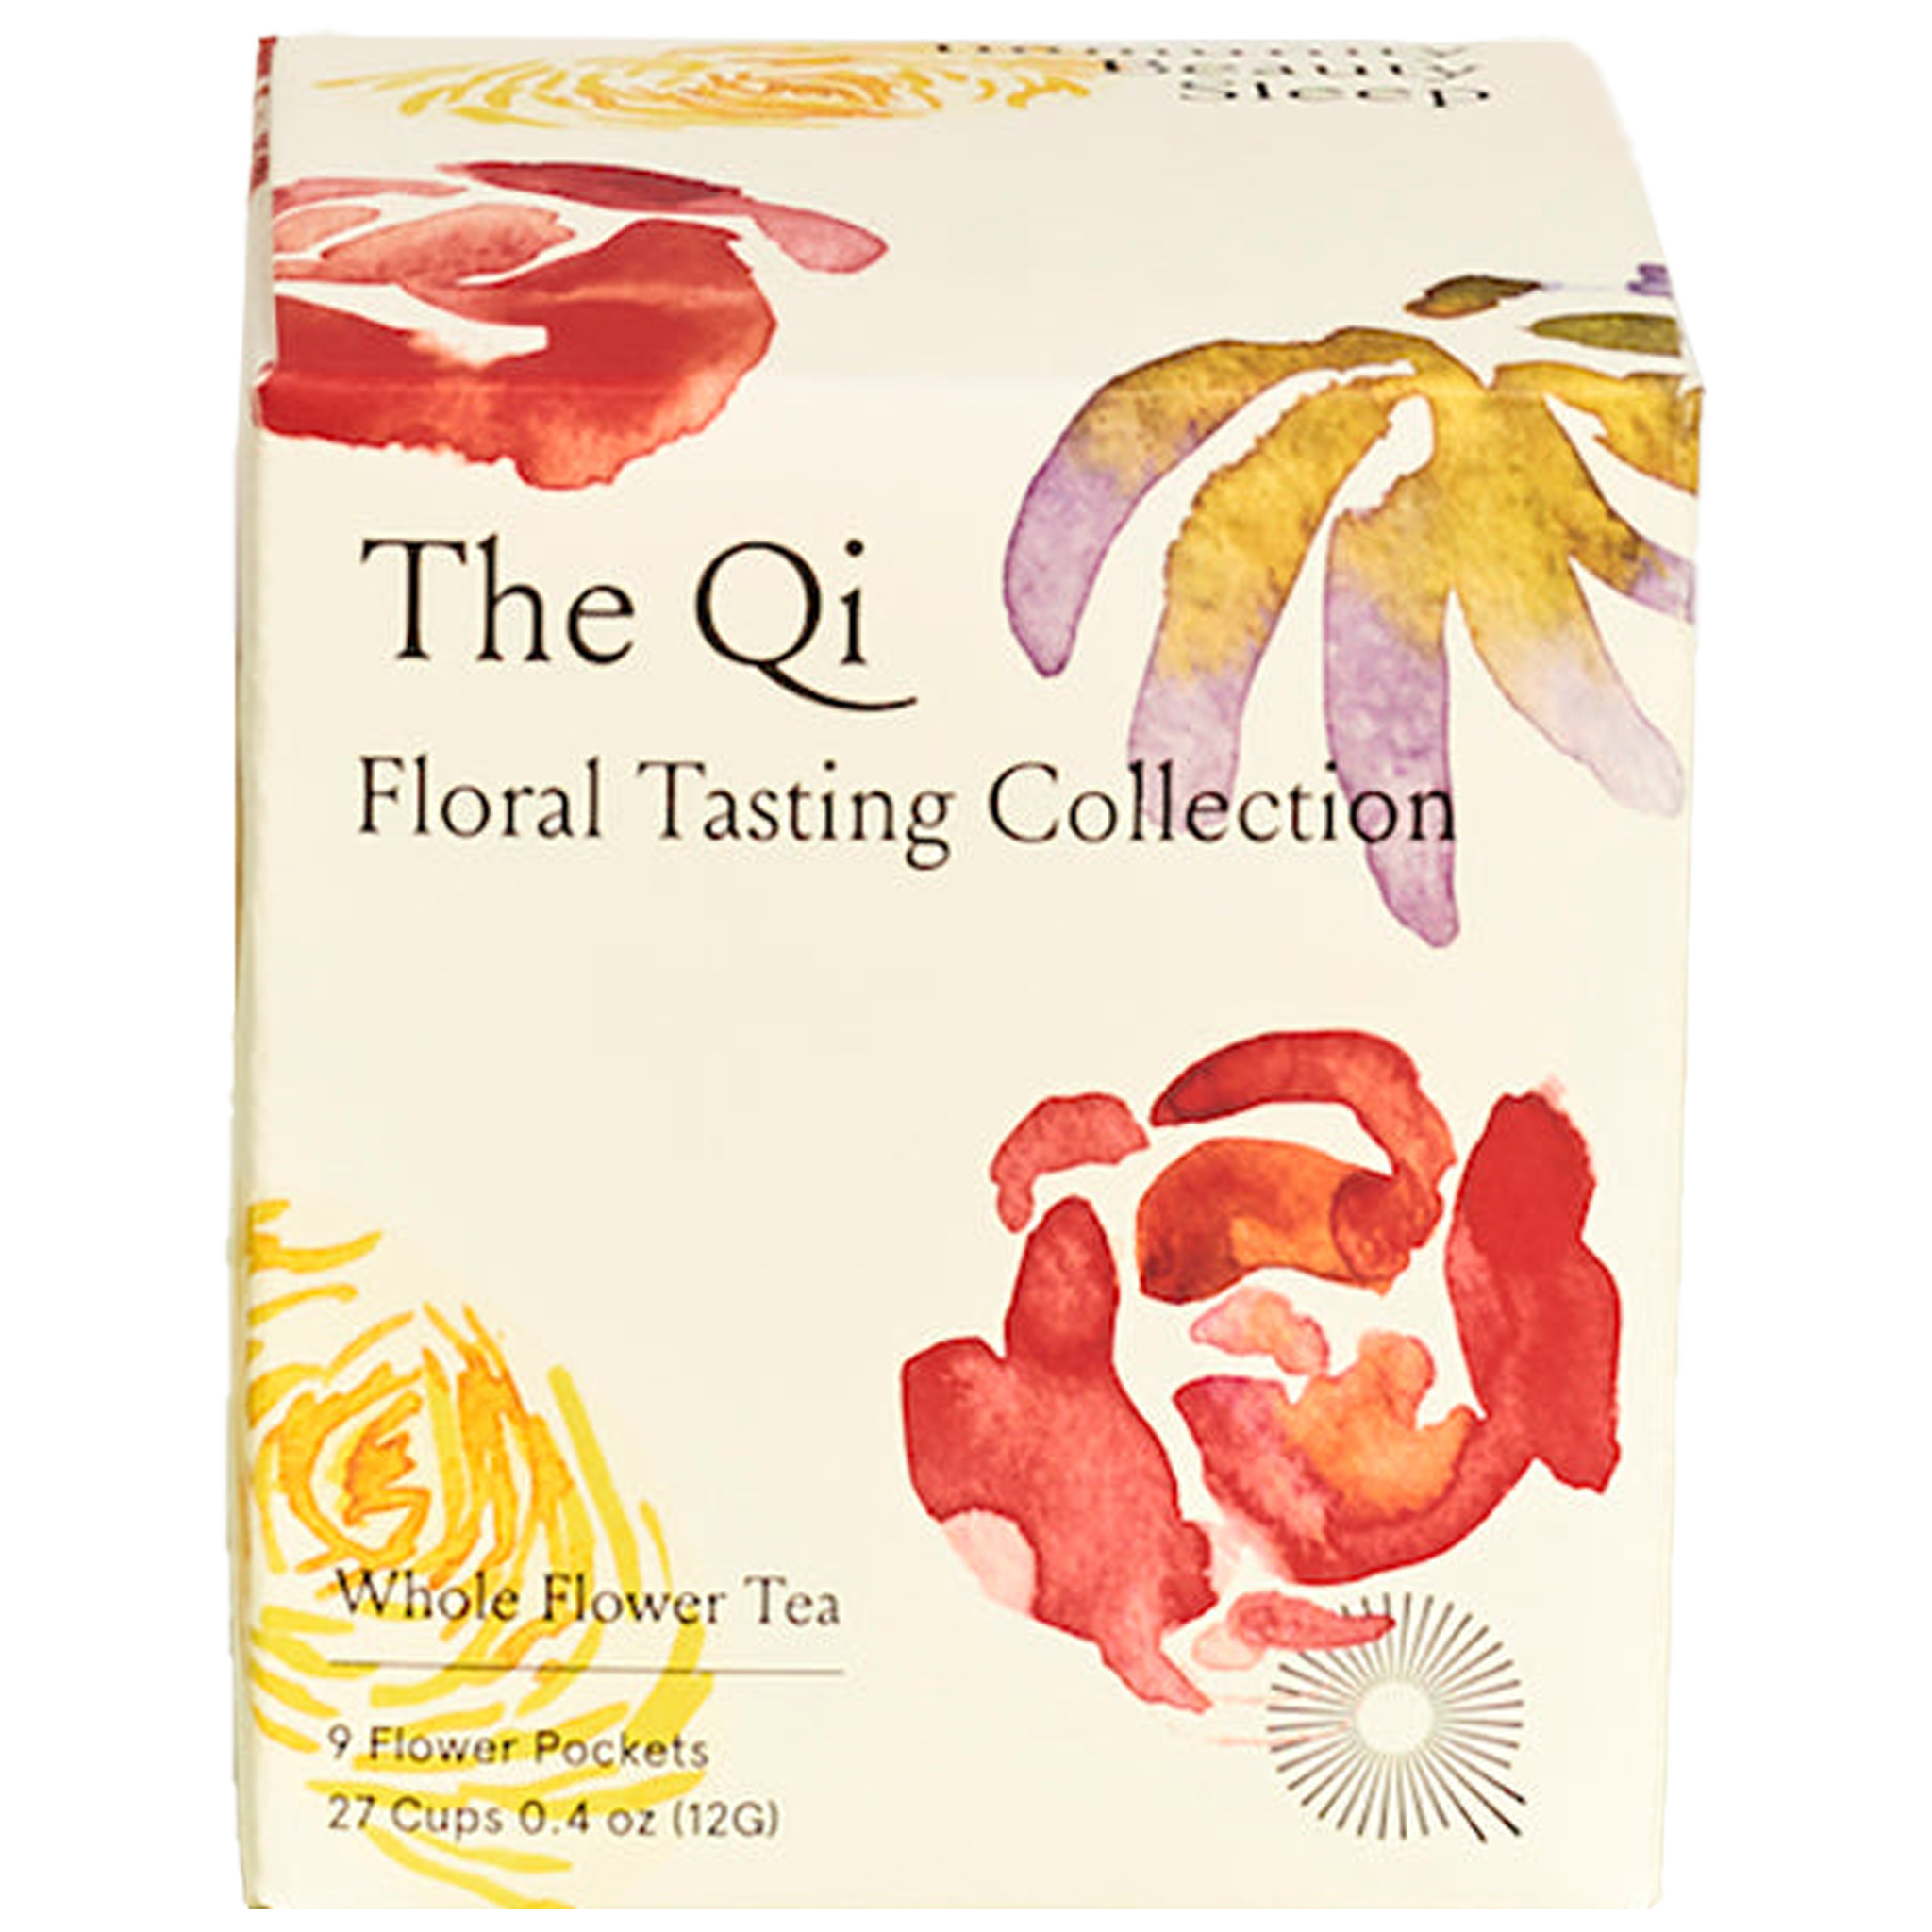 Floral Tasting Collection Variety Box